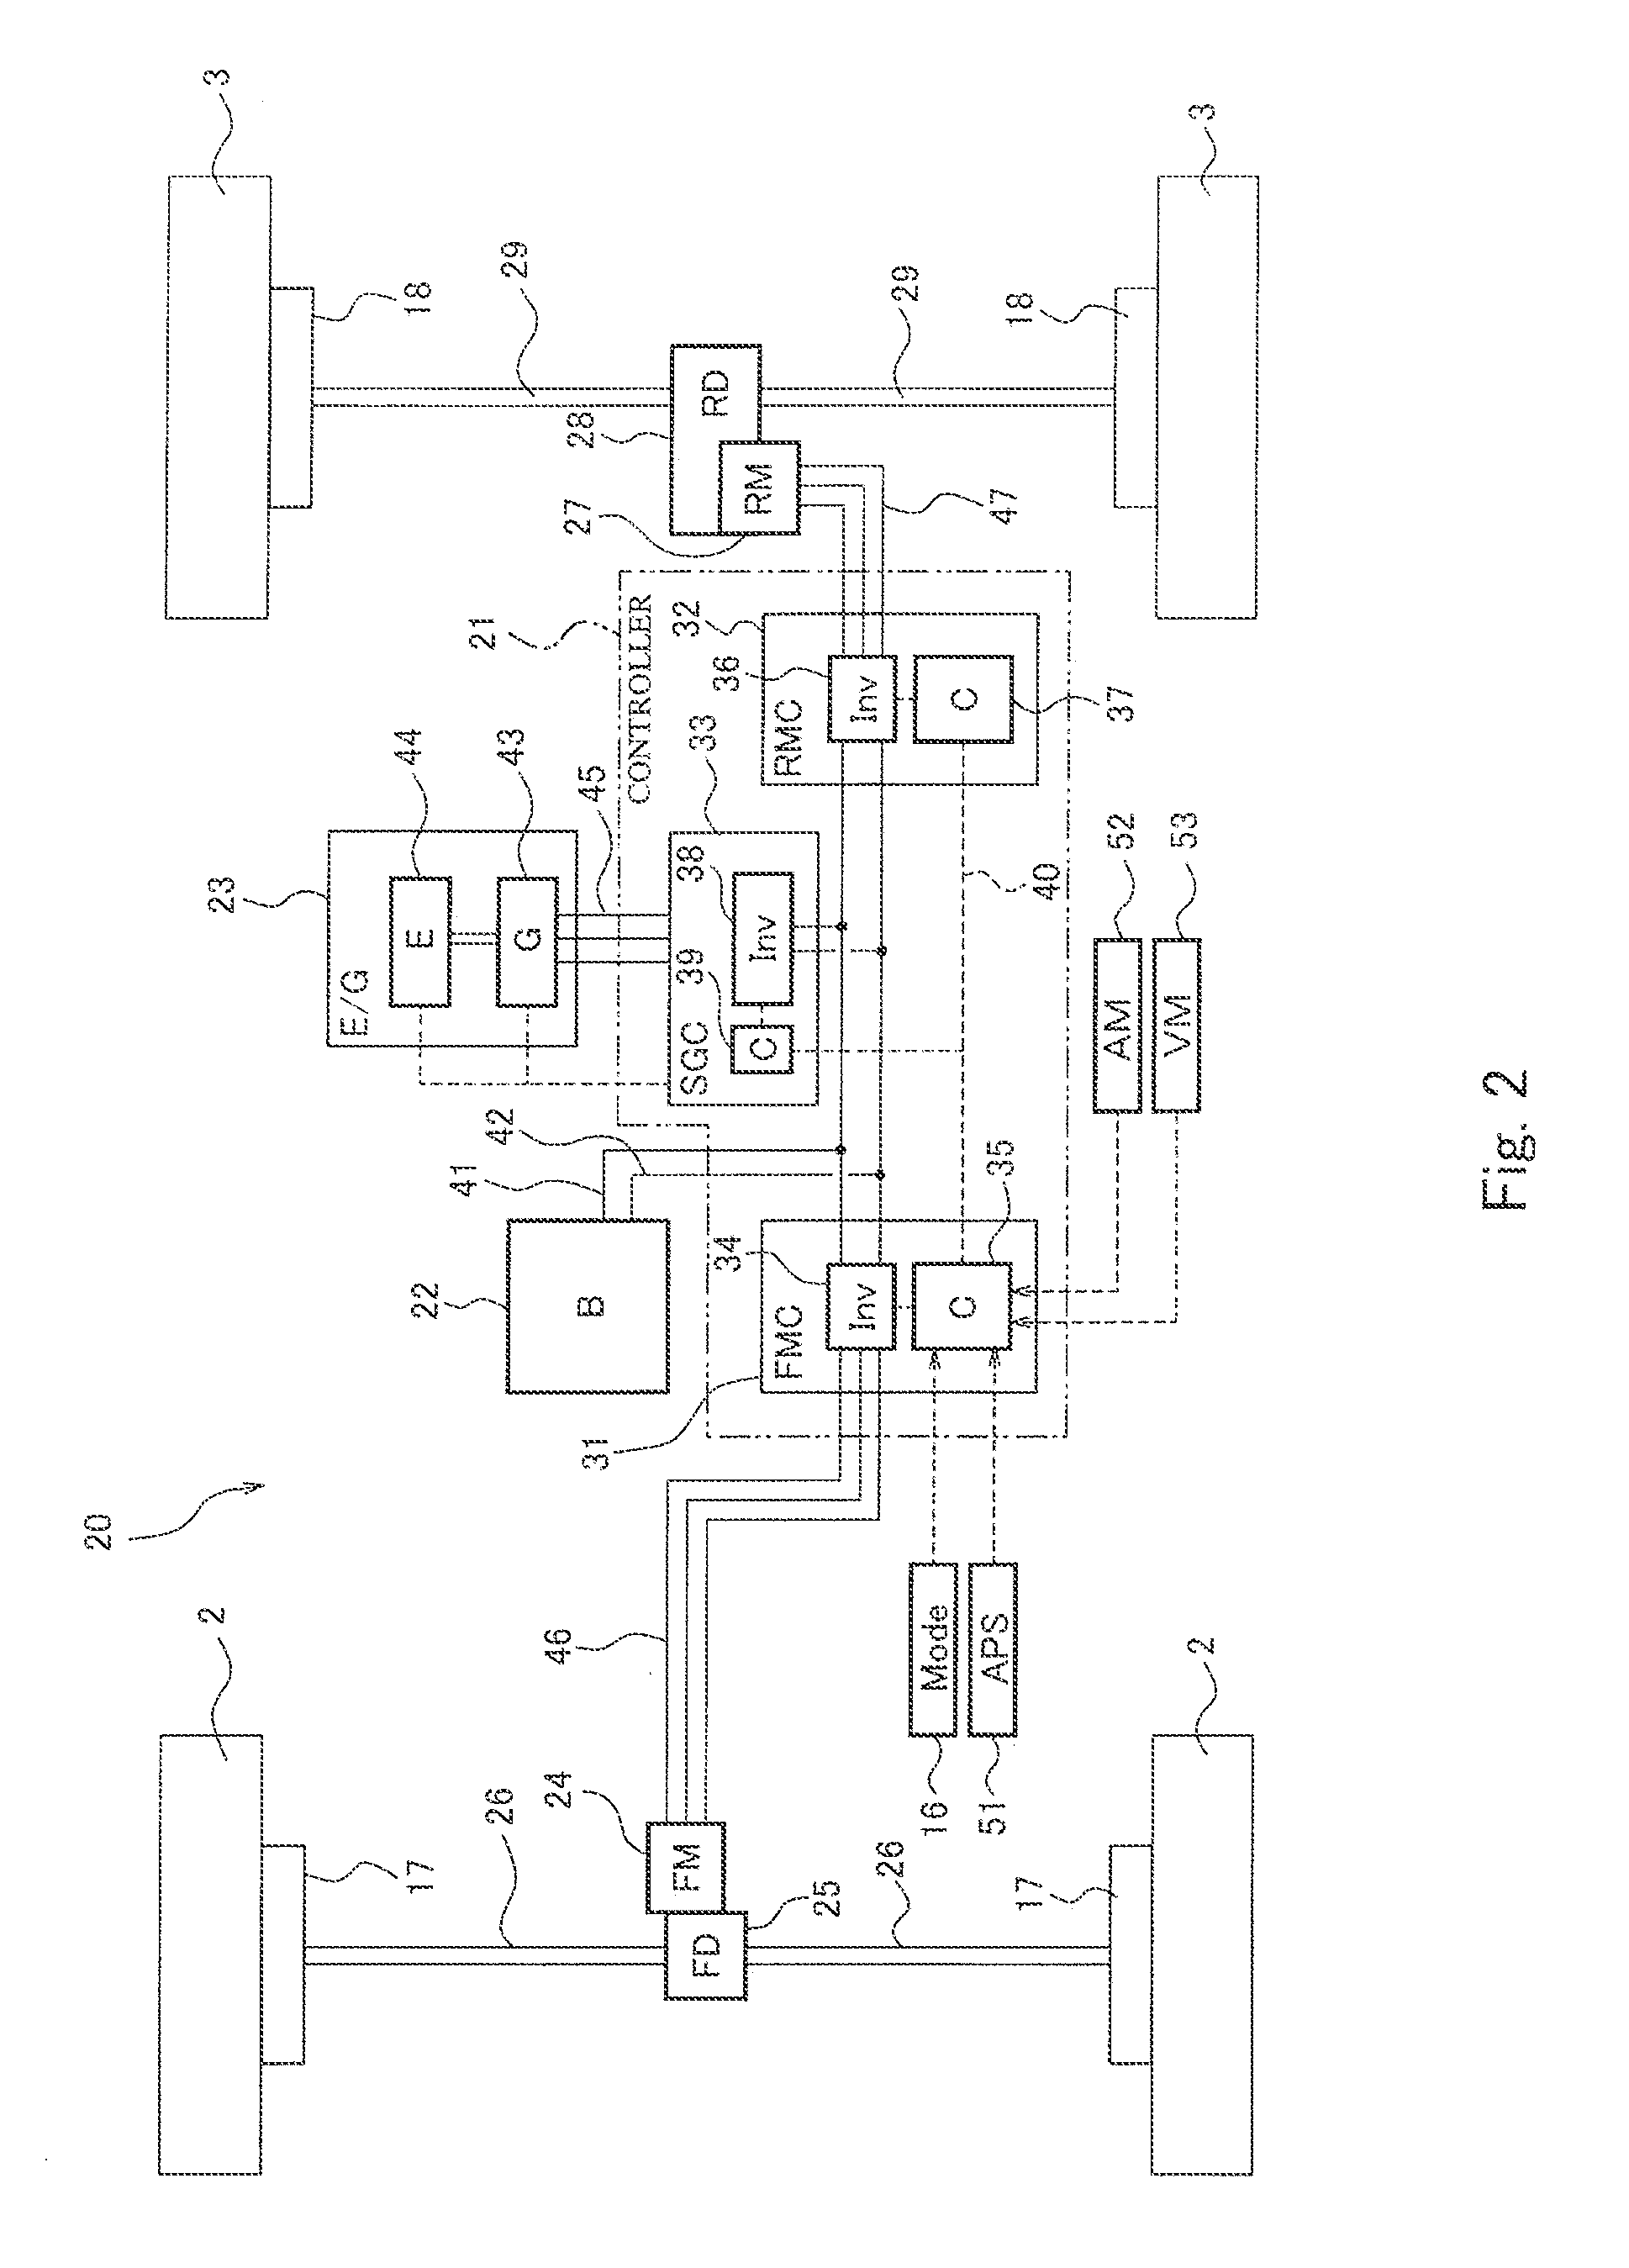 Drive Control System In Series-Hybrid Vehicle